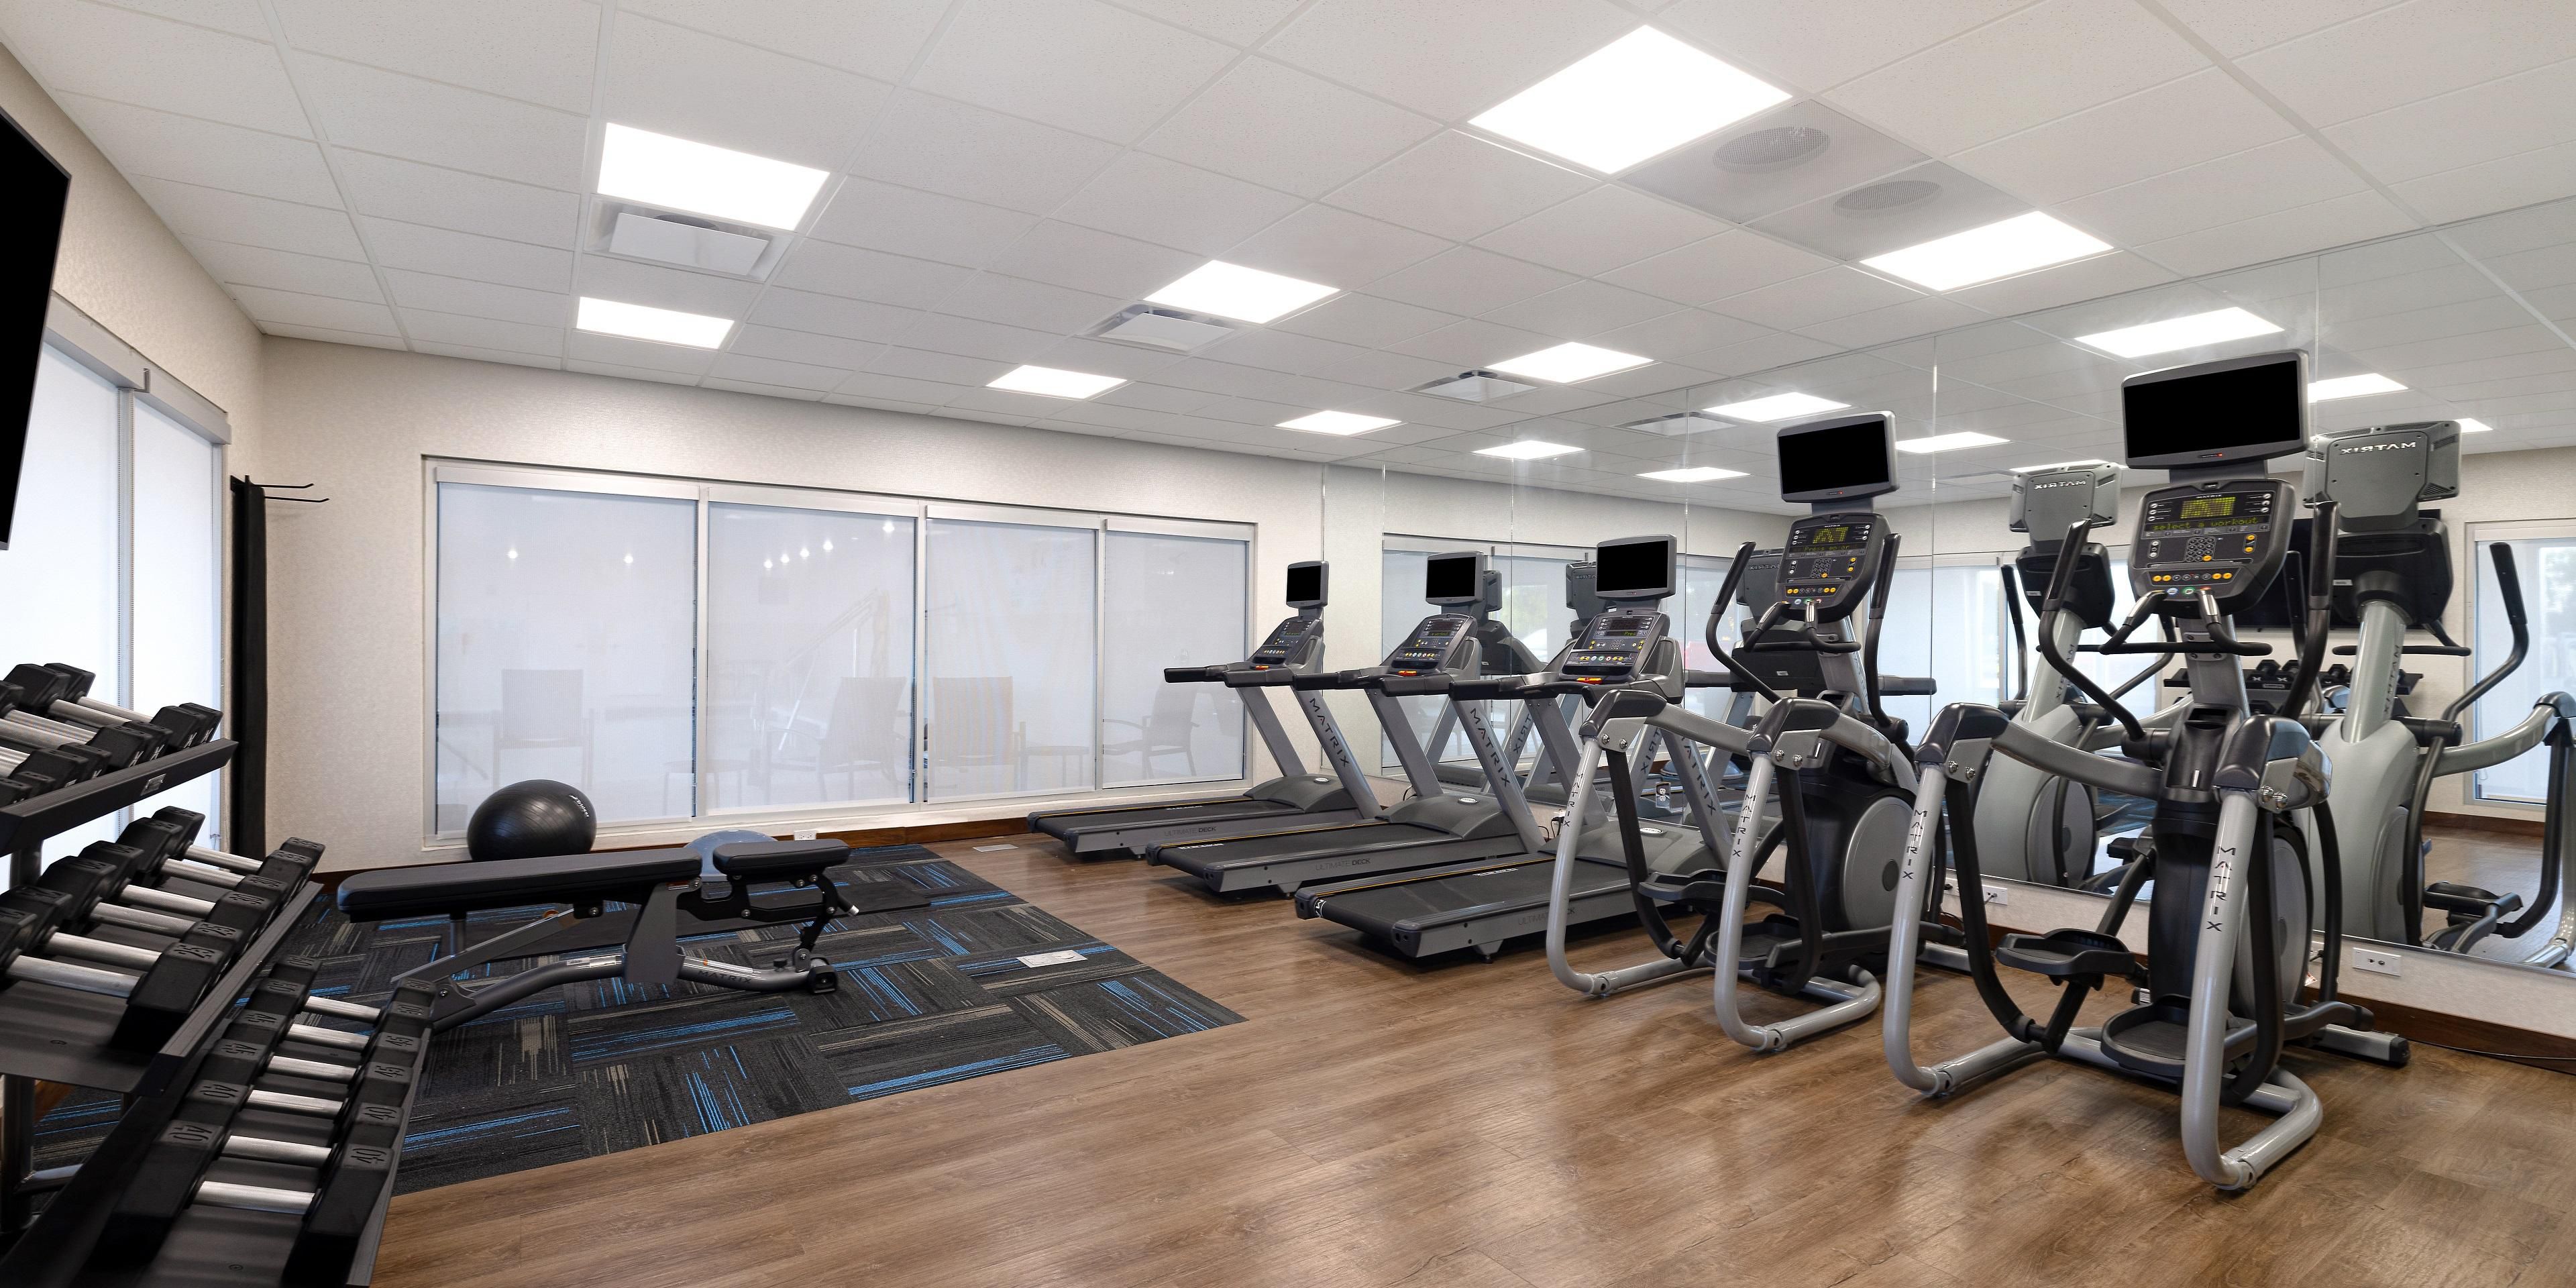 Workout in our indoor fitness center.